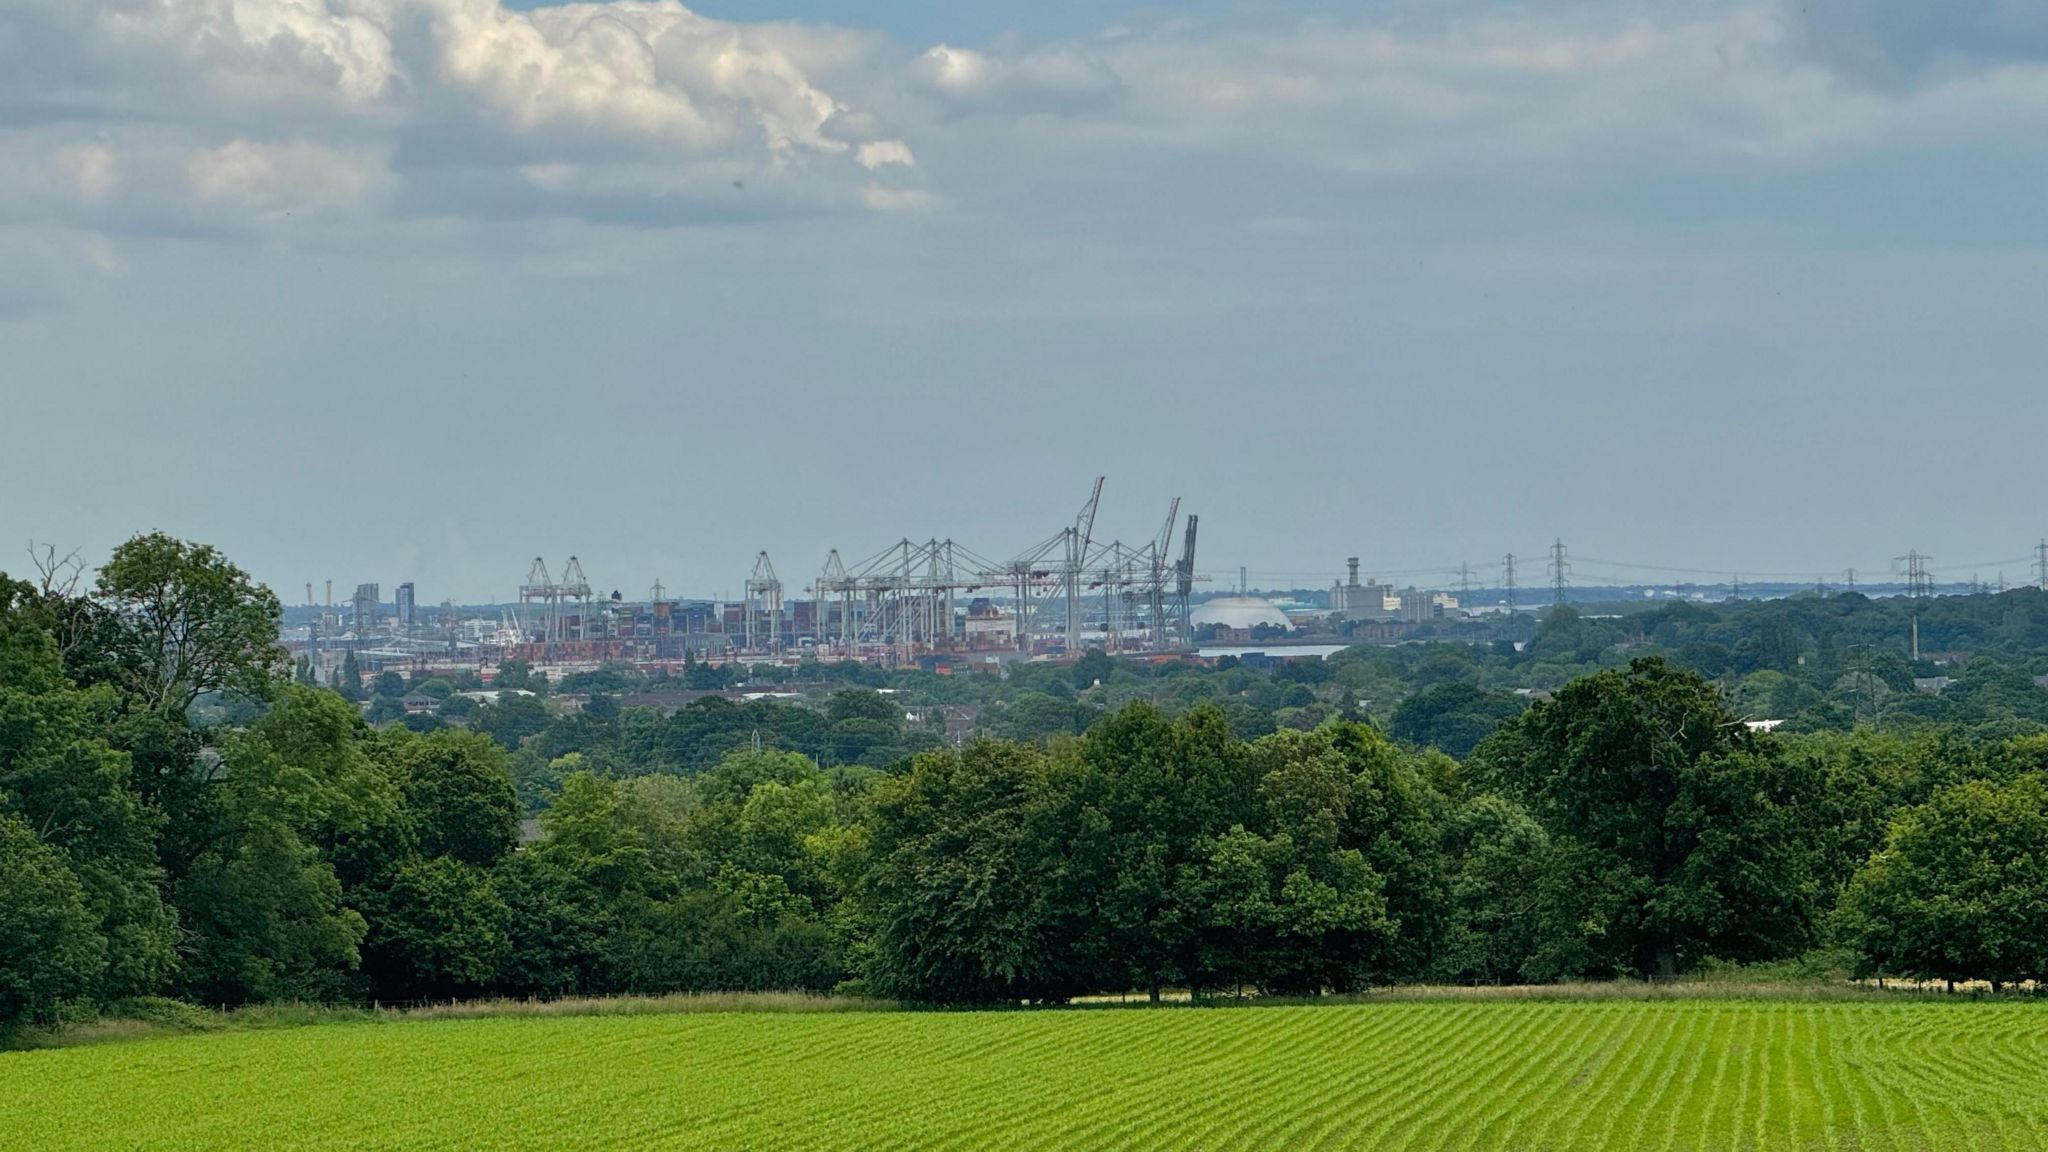 SUNDAY - A green field with the industrial cranes at Southampton port on the horizon